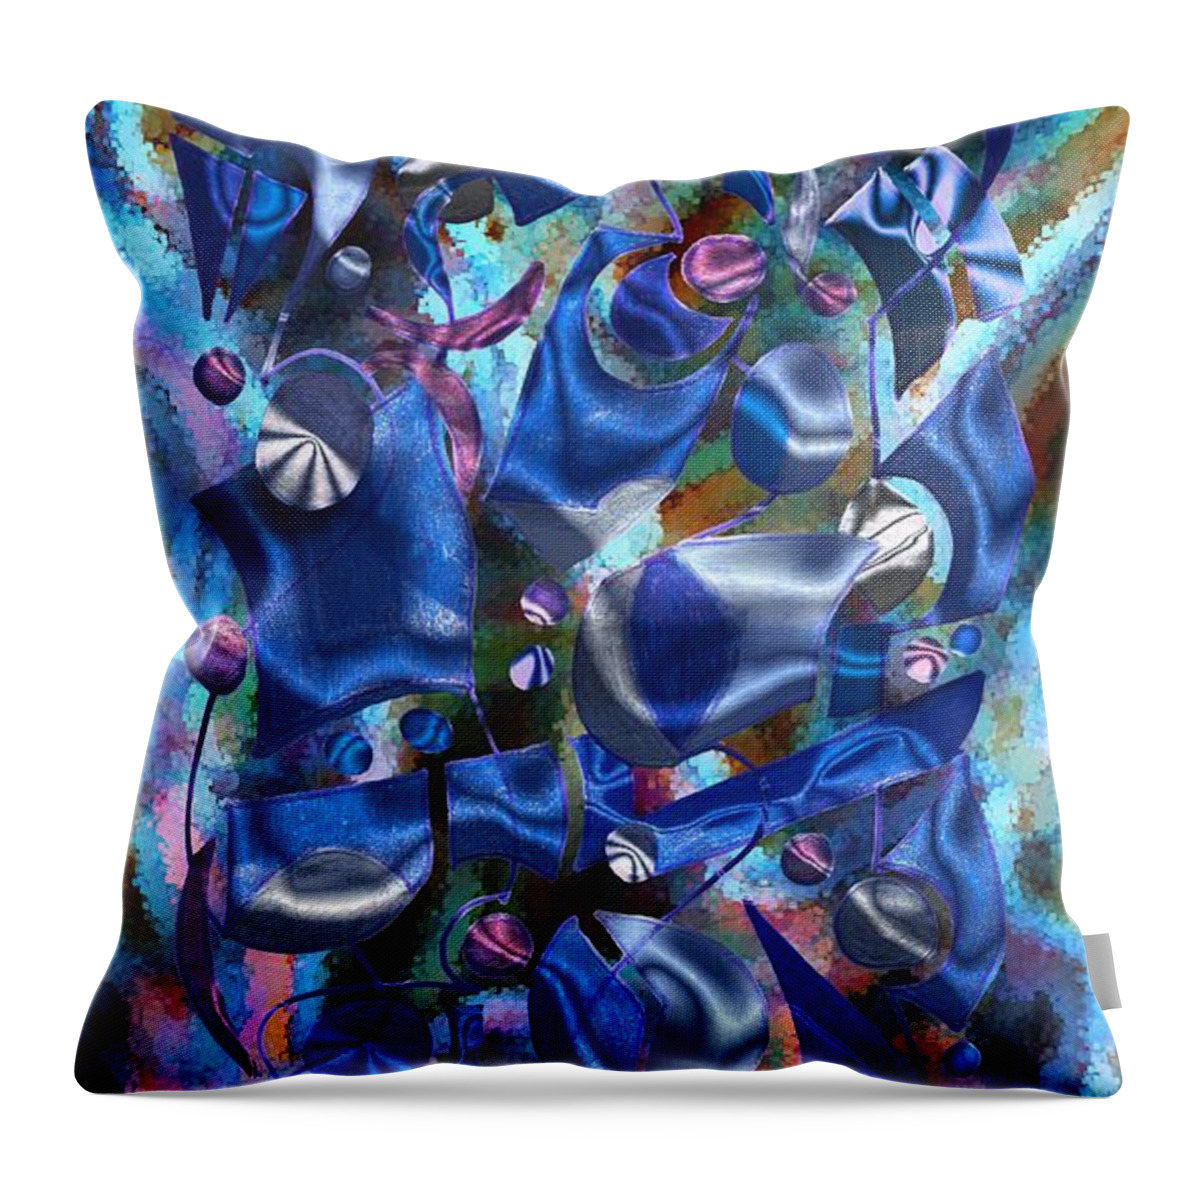 Abstract Throw Pillow featuring the digital art Festive Joy #1 by Mark Sellers